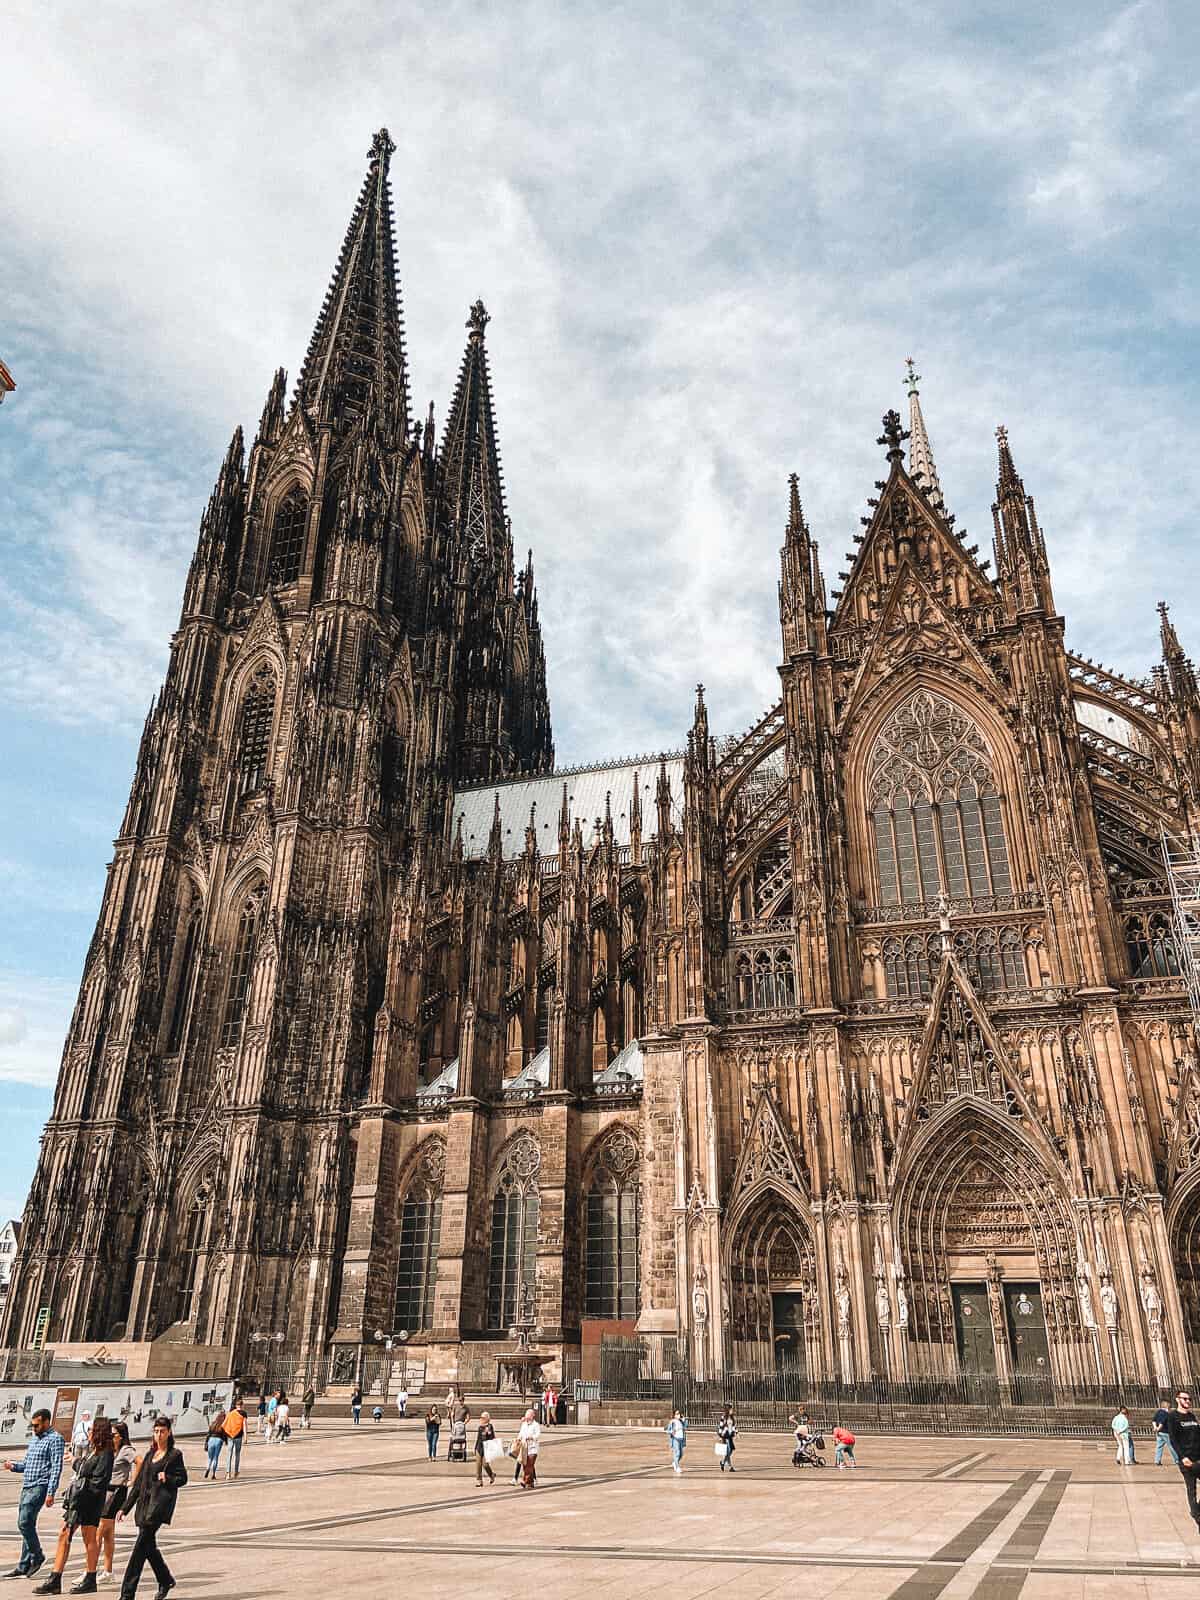 The imposing Gothic architecture of Cologne Cathedral stands grandly under a blue sky, with its intricate facades and towering spires, as tourists and locals alike roam the square in the foreground.